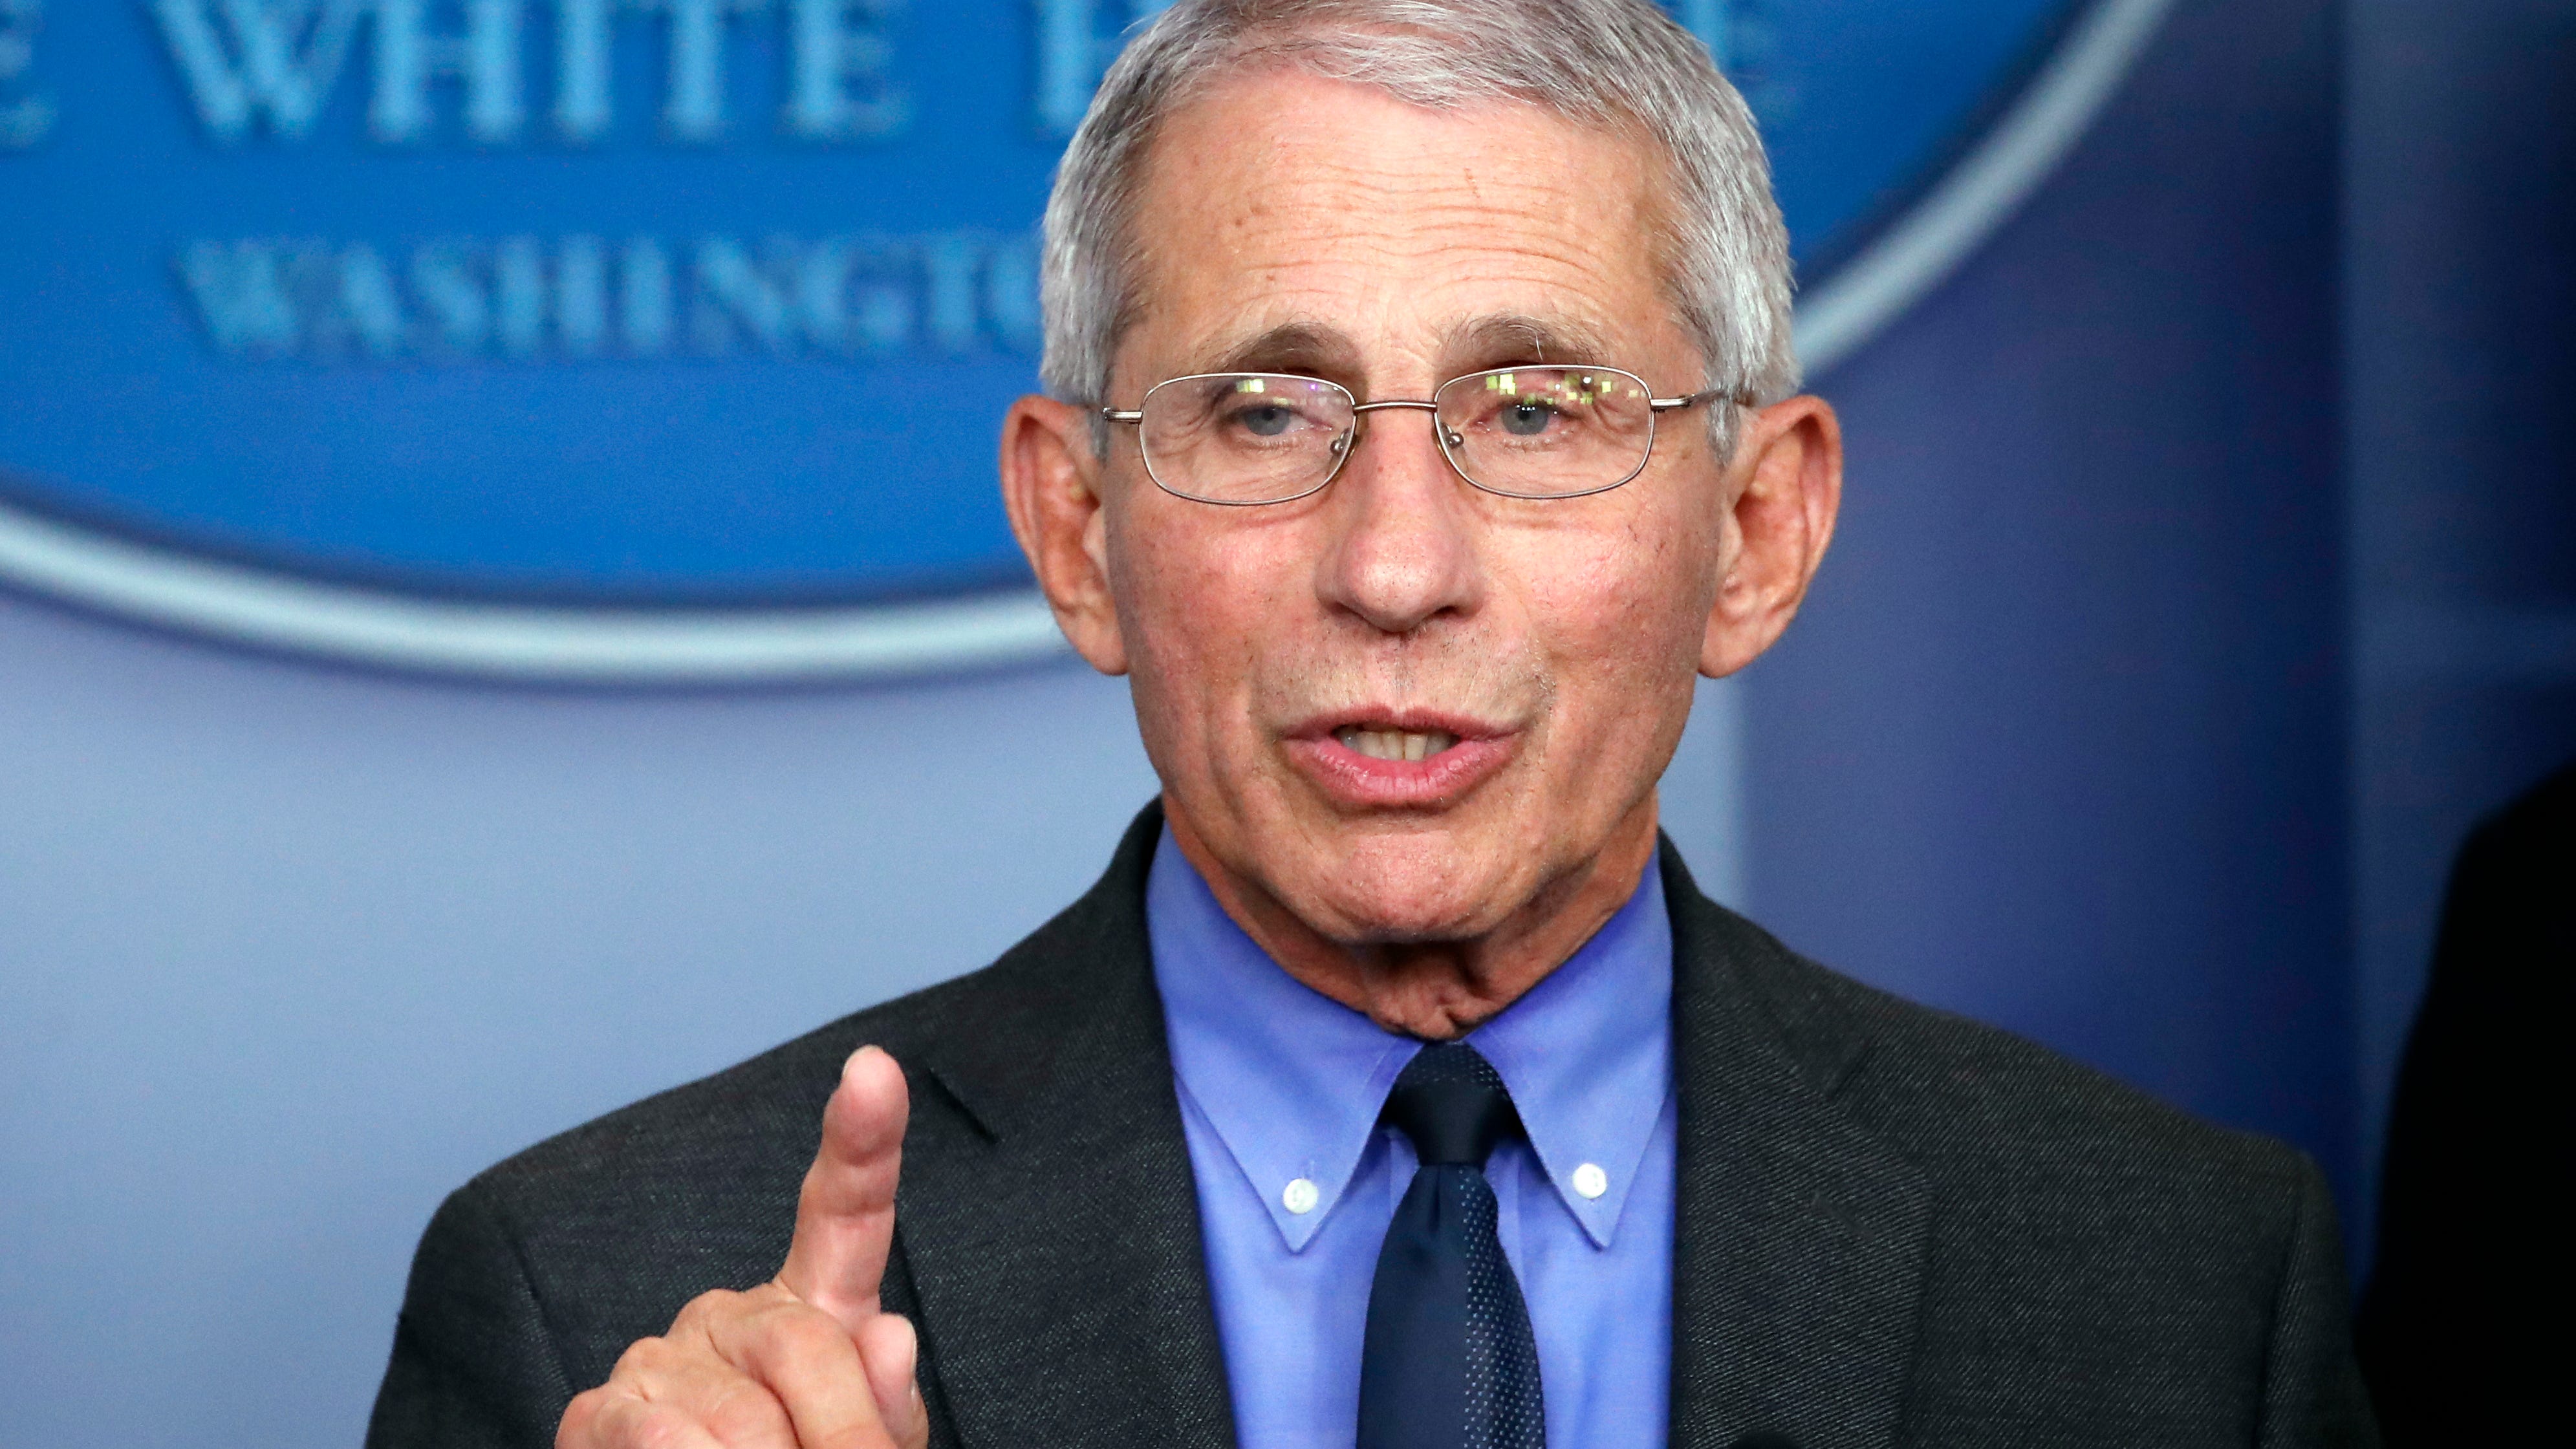 Dr. Anthony Fauci, director of the National Institute of Allergy and Infectious Diseases, speaks about the coronavirus in Washington.